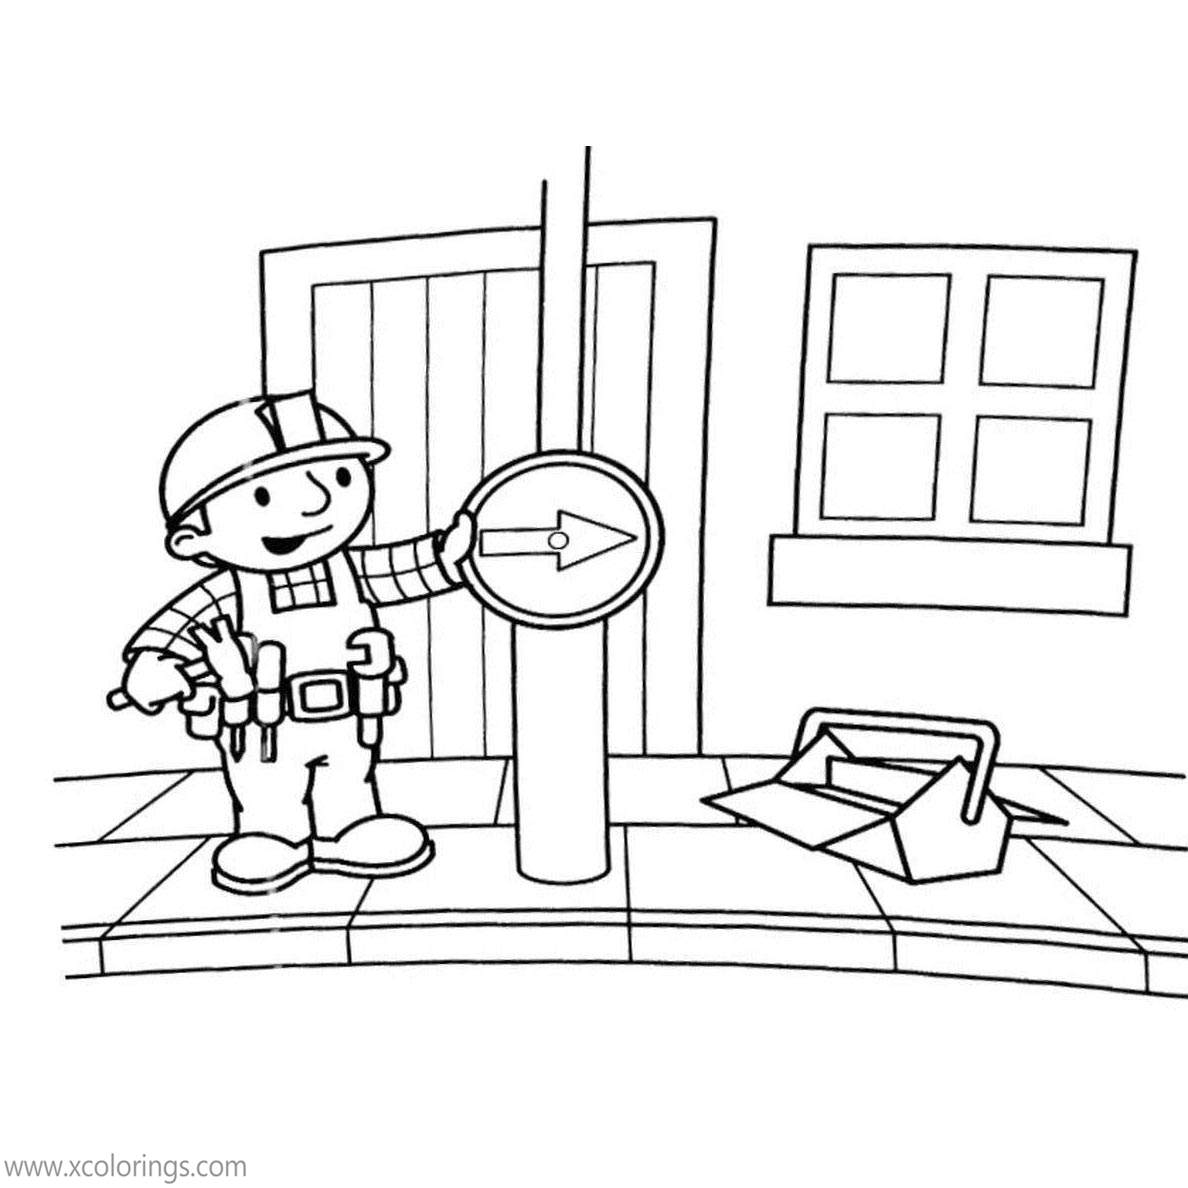 Free Bob The Builder Coloring Pages Bob Repairs the Street Sign printable